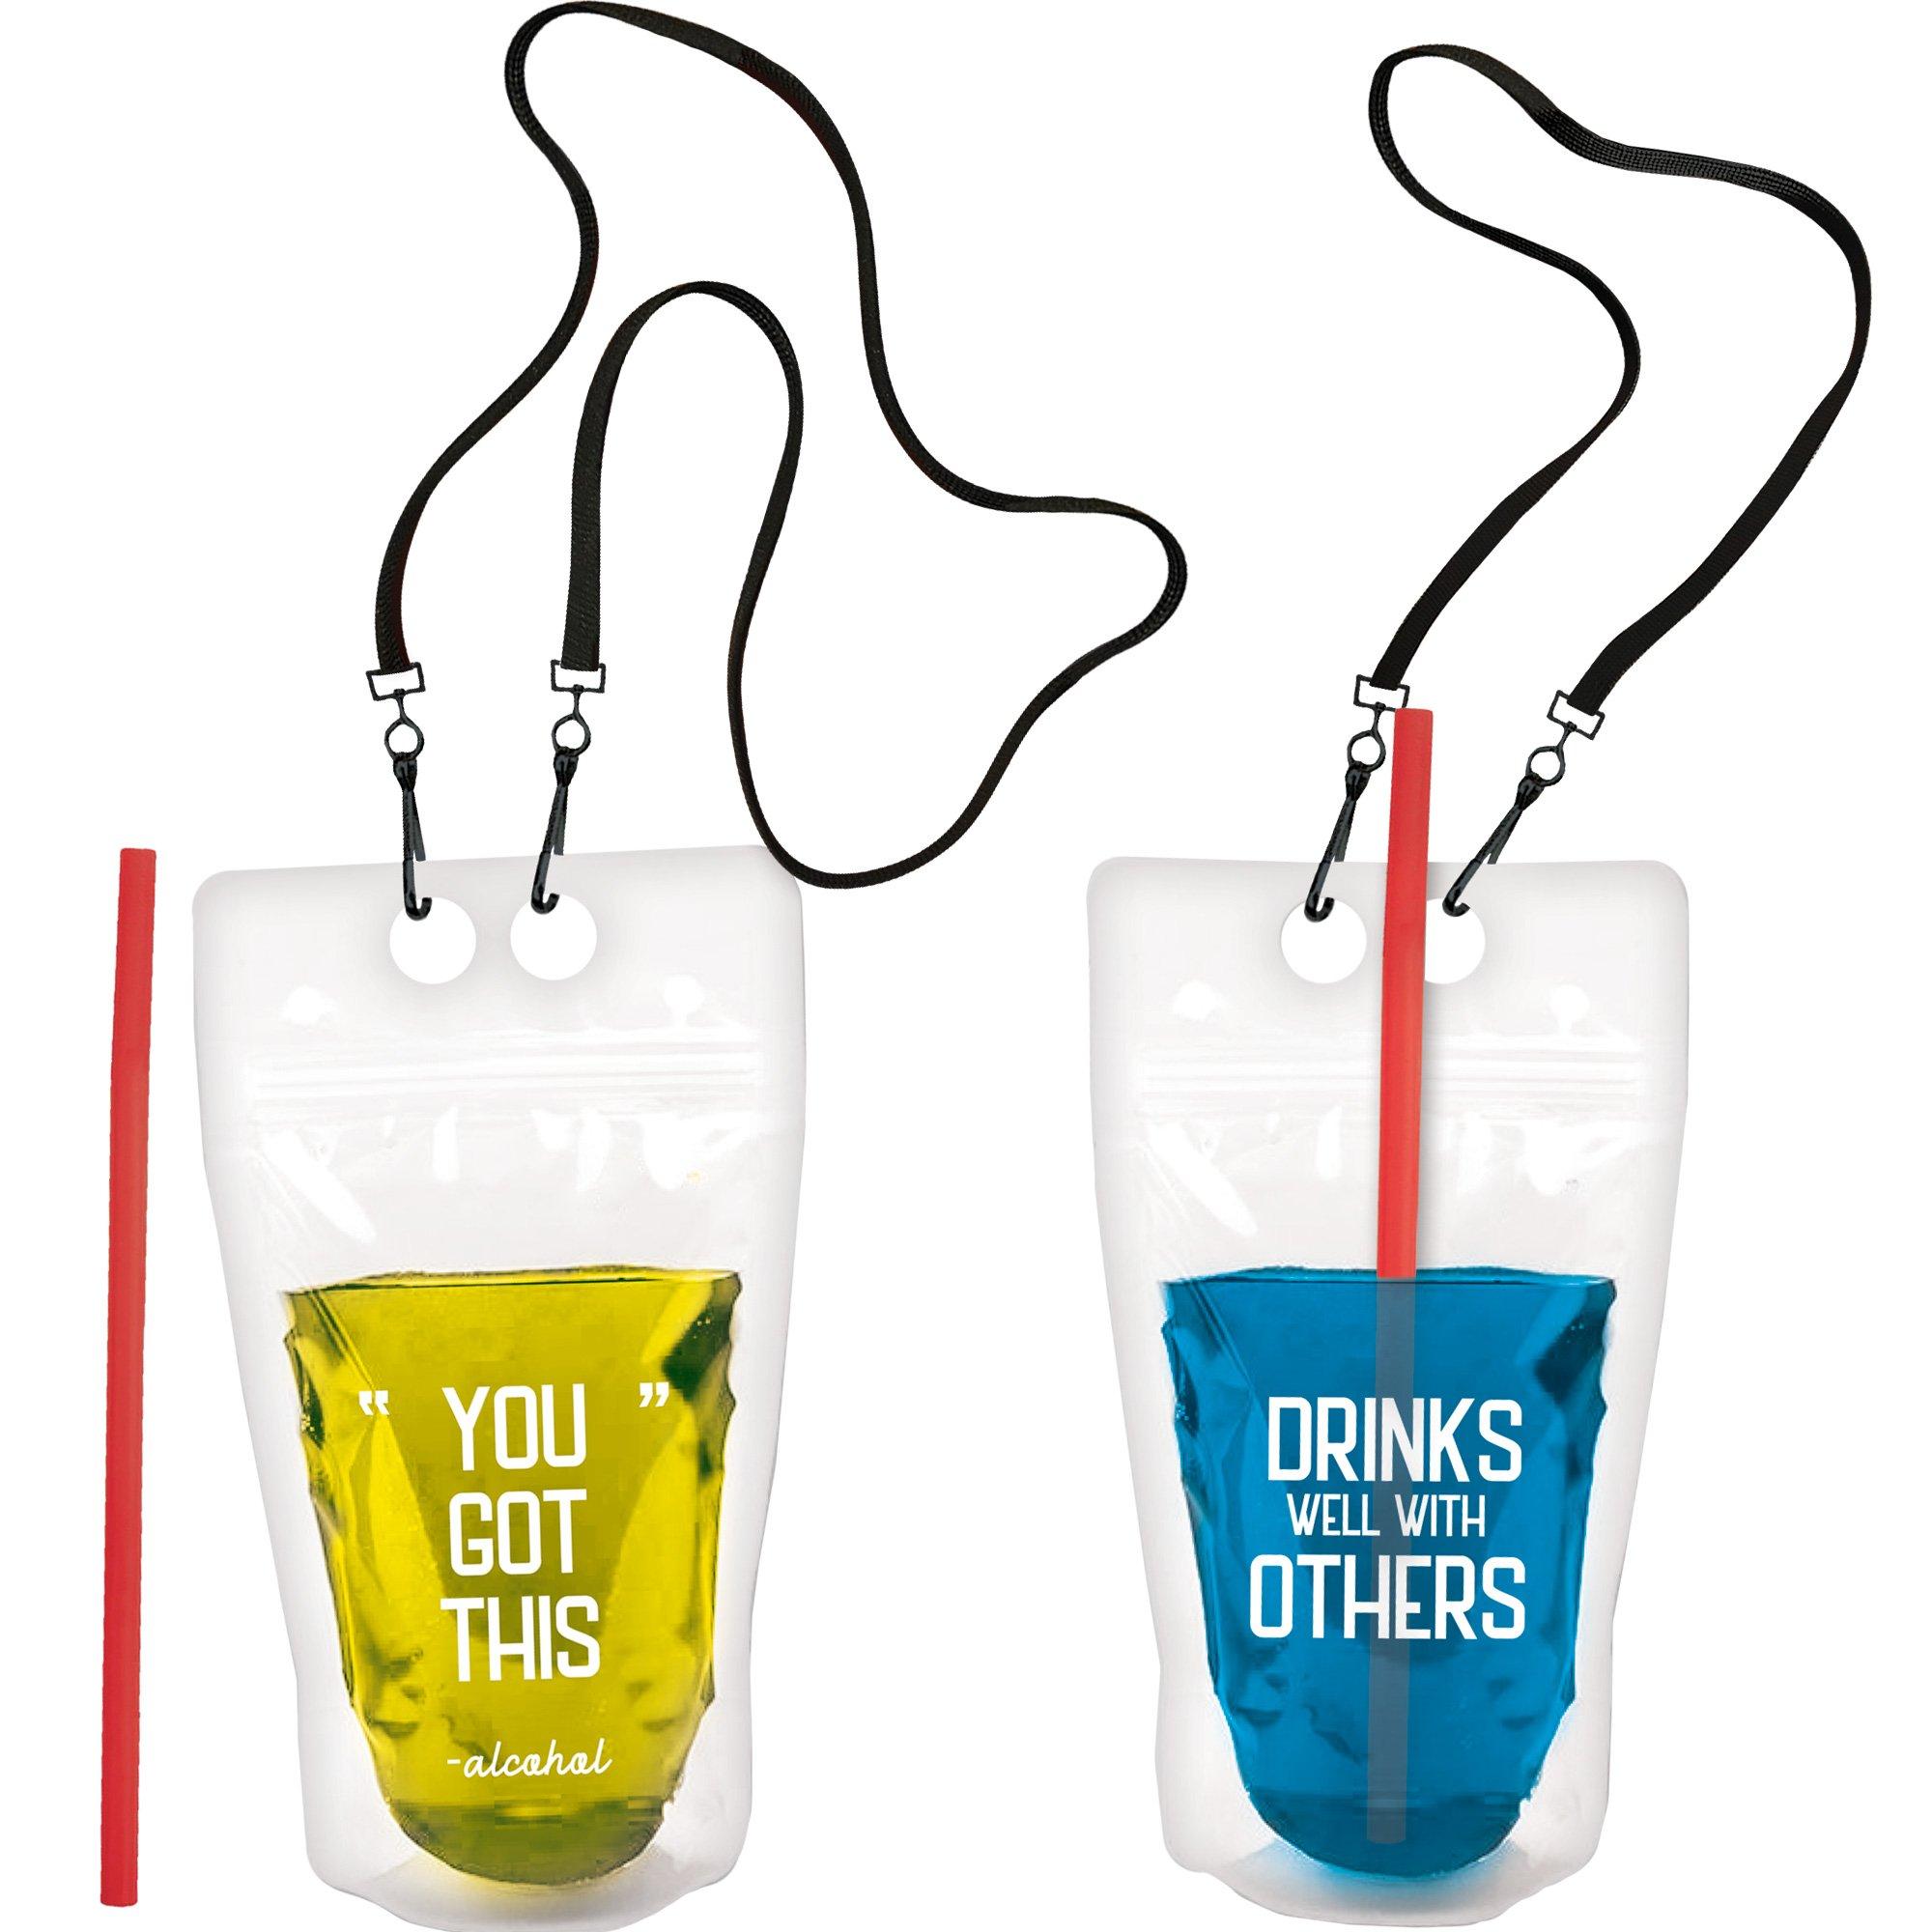 These Plastic Drink Pouches Are Practically BEGGING You to Make